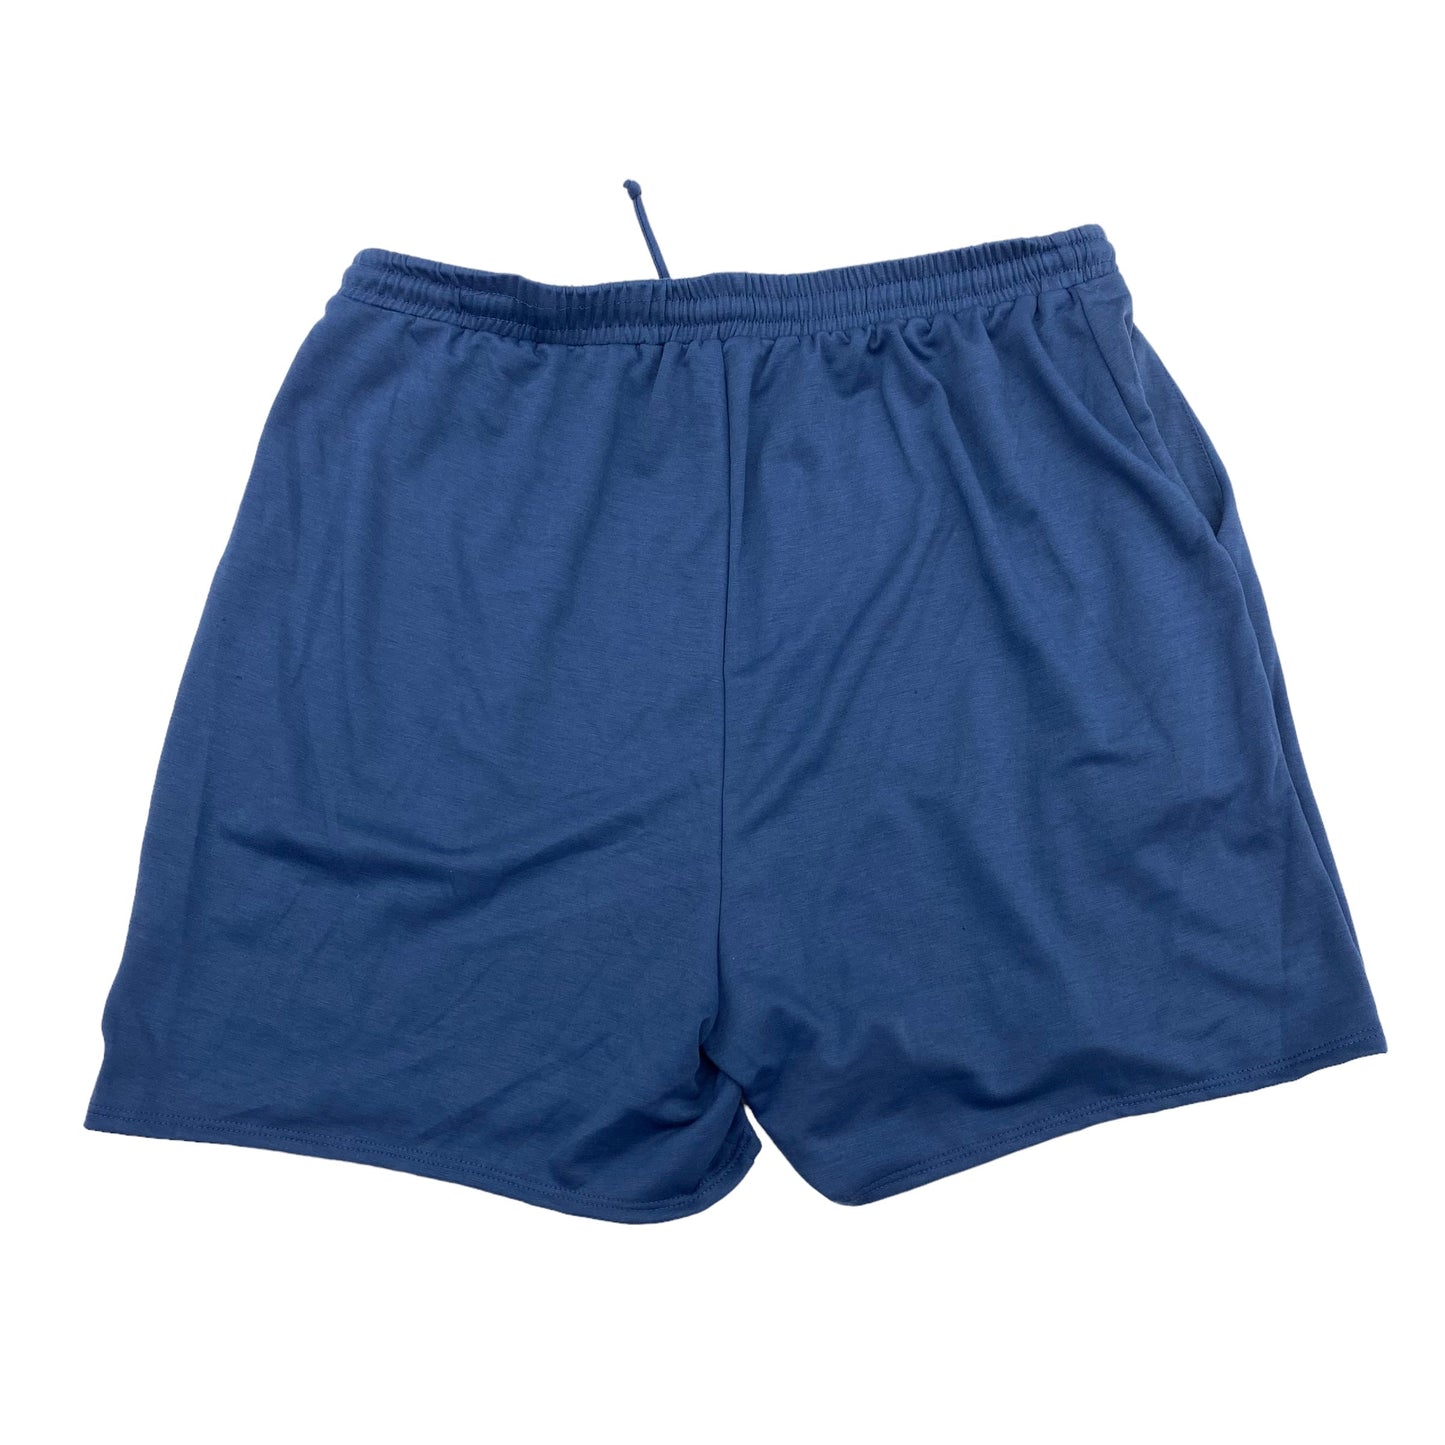 Shorts By Green Envelope  Size: 1x